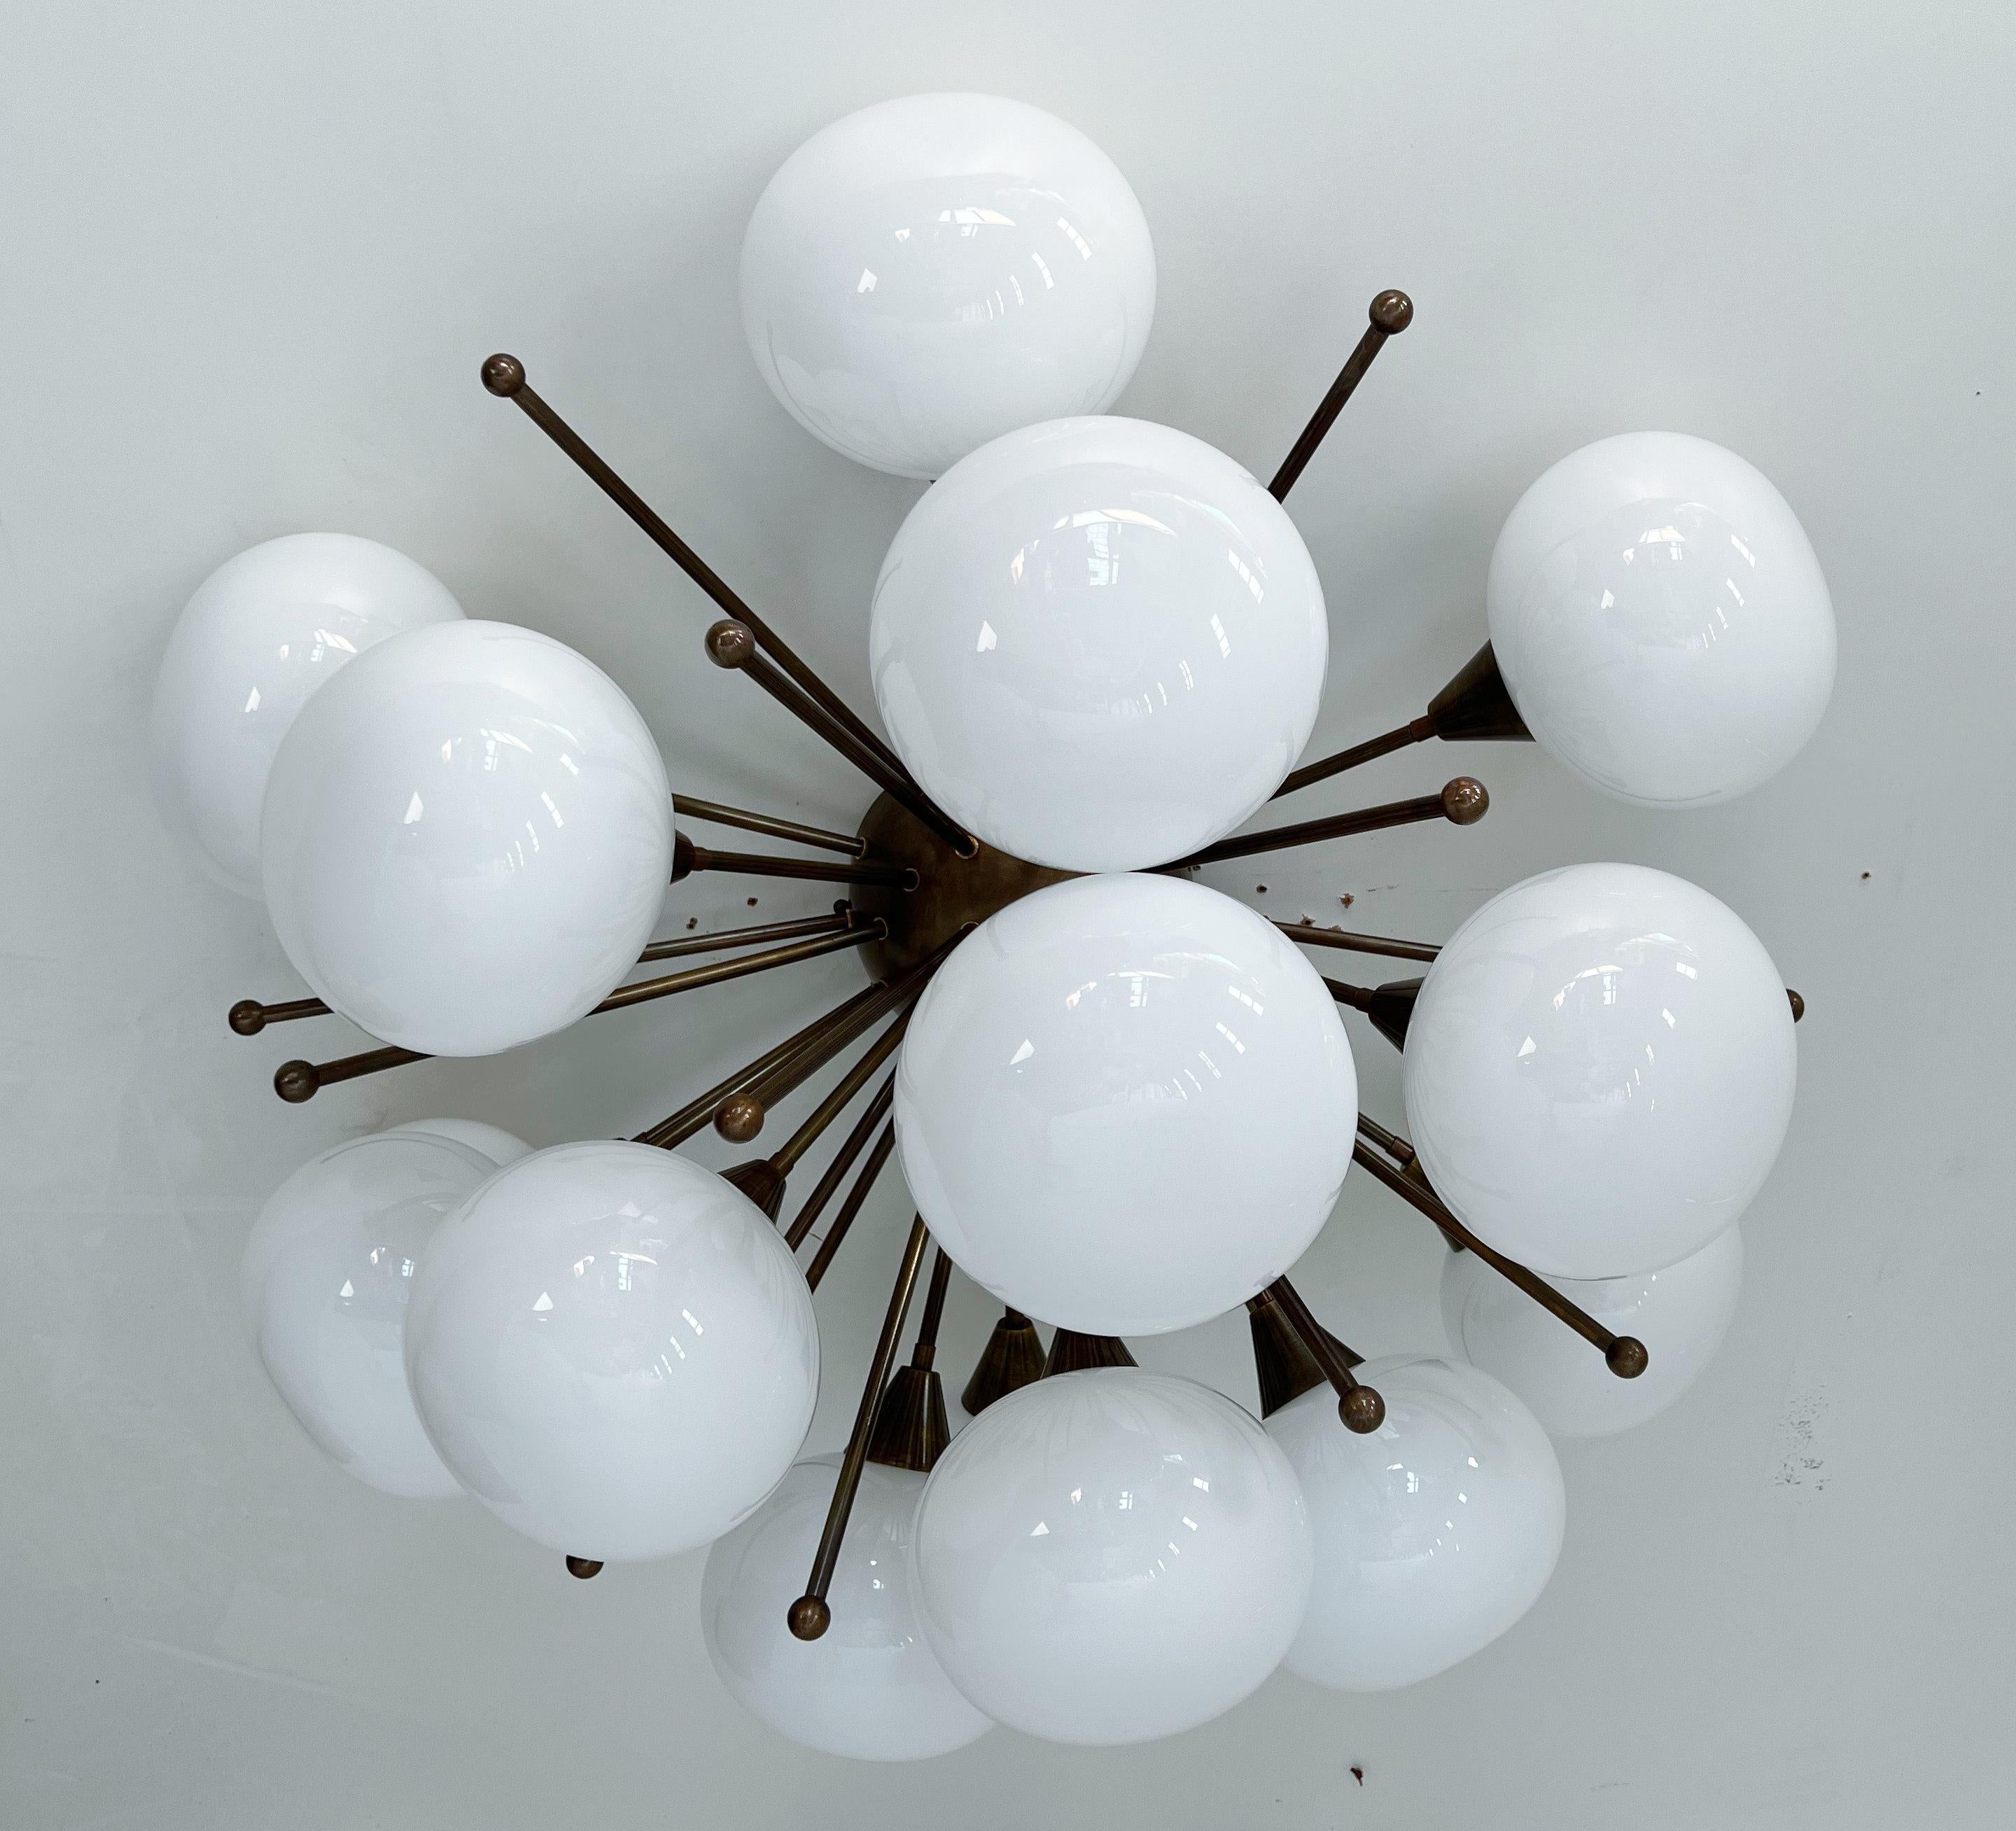 Italian sputnik flush mount with glossy white Murano pebble glass shades mounted on solid brass frame
Designed by Fabio Bergomi / Made in Italy
15 lights / E12 or E14 type / max 40W each
Diameter: 35.5 inches / Height: 18 inches
Order Only / This